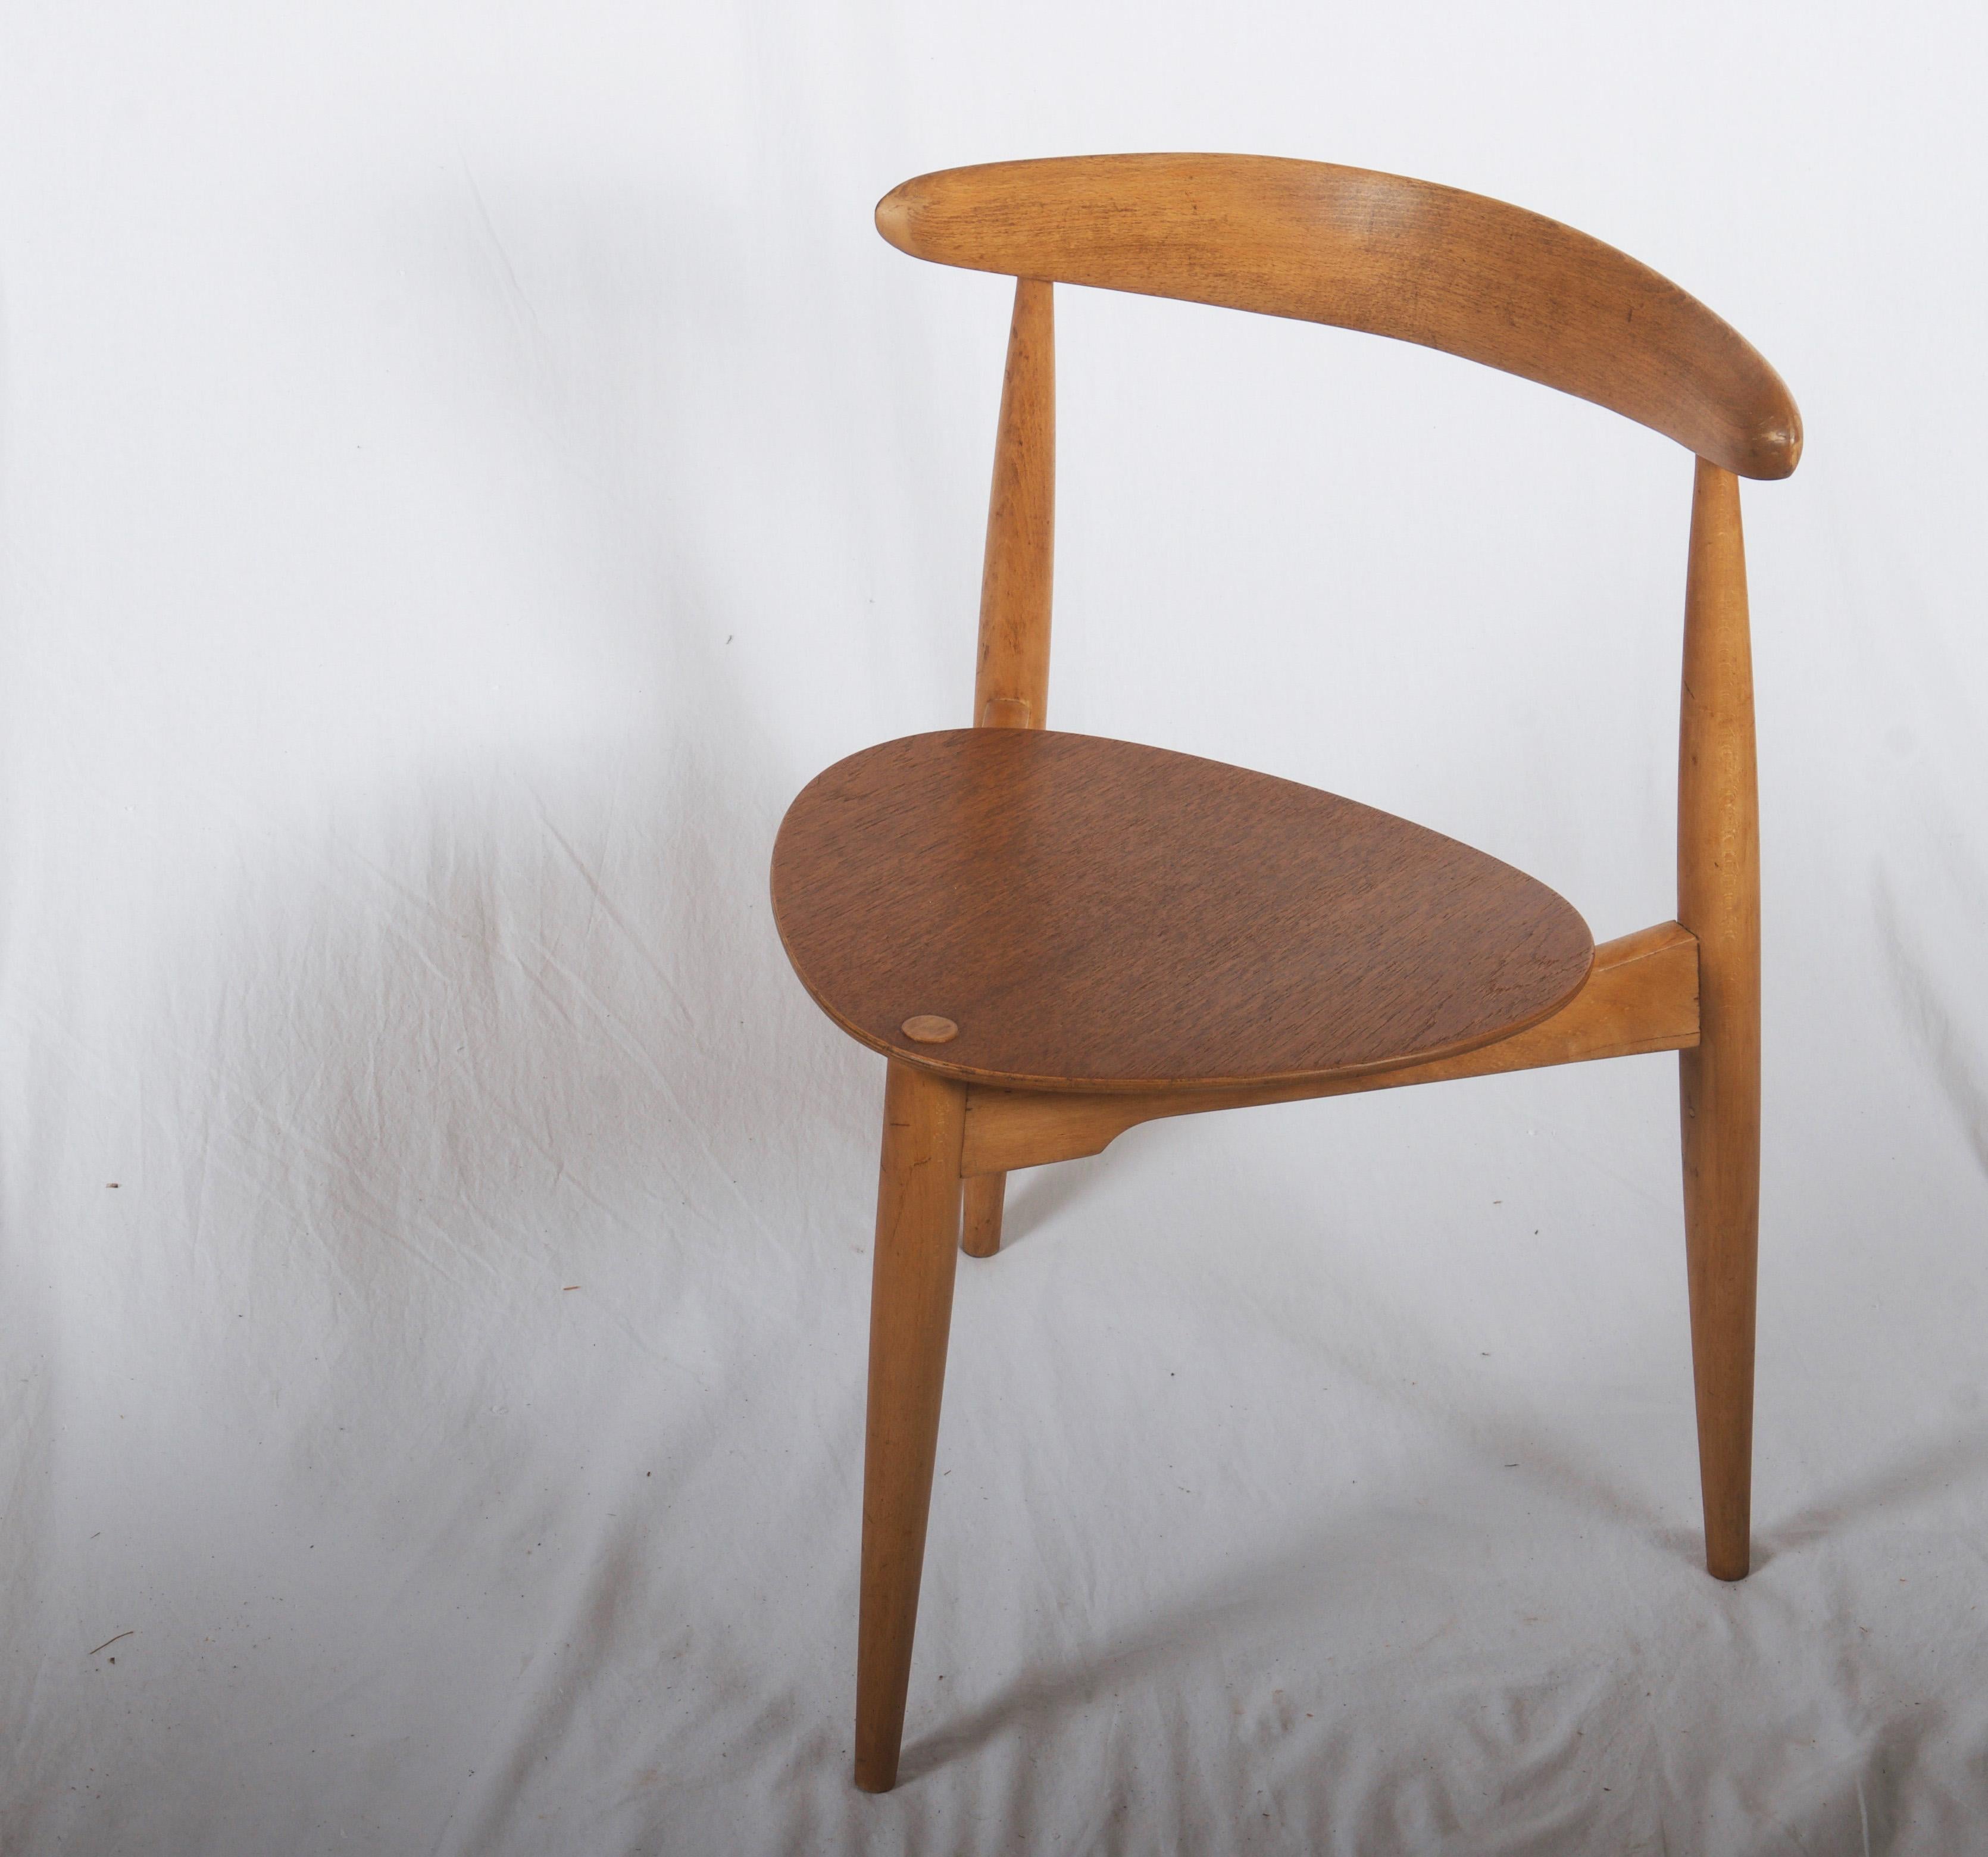 Hans J. Wegner stackable ‘heart’ tripod chairs, the seat made of the veneered teak frame and top rail of oak. Designed in 1952. Produced by Fritz Hansen, model FH 4103.
Literature. Noritsugu Oda: 'Danish Chairs' p. 118.
Signs of natural patina, up